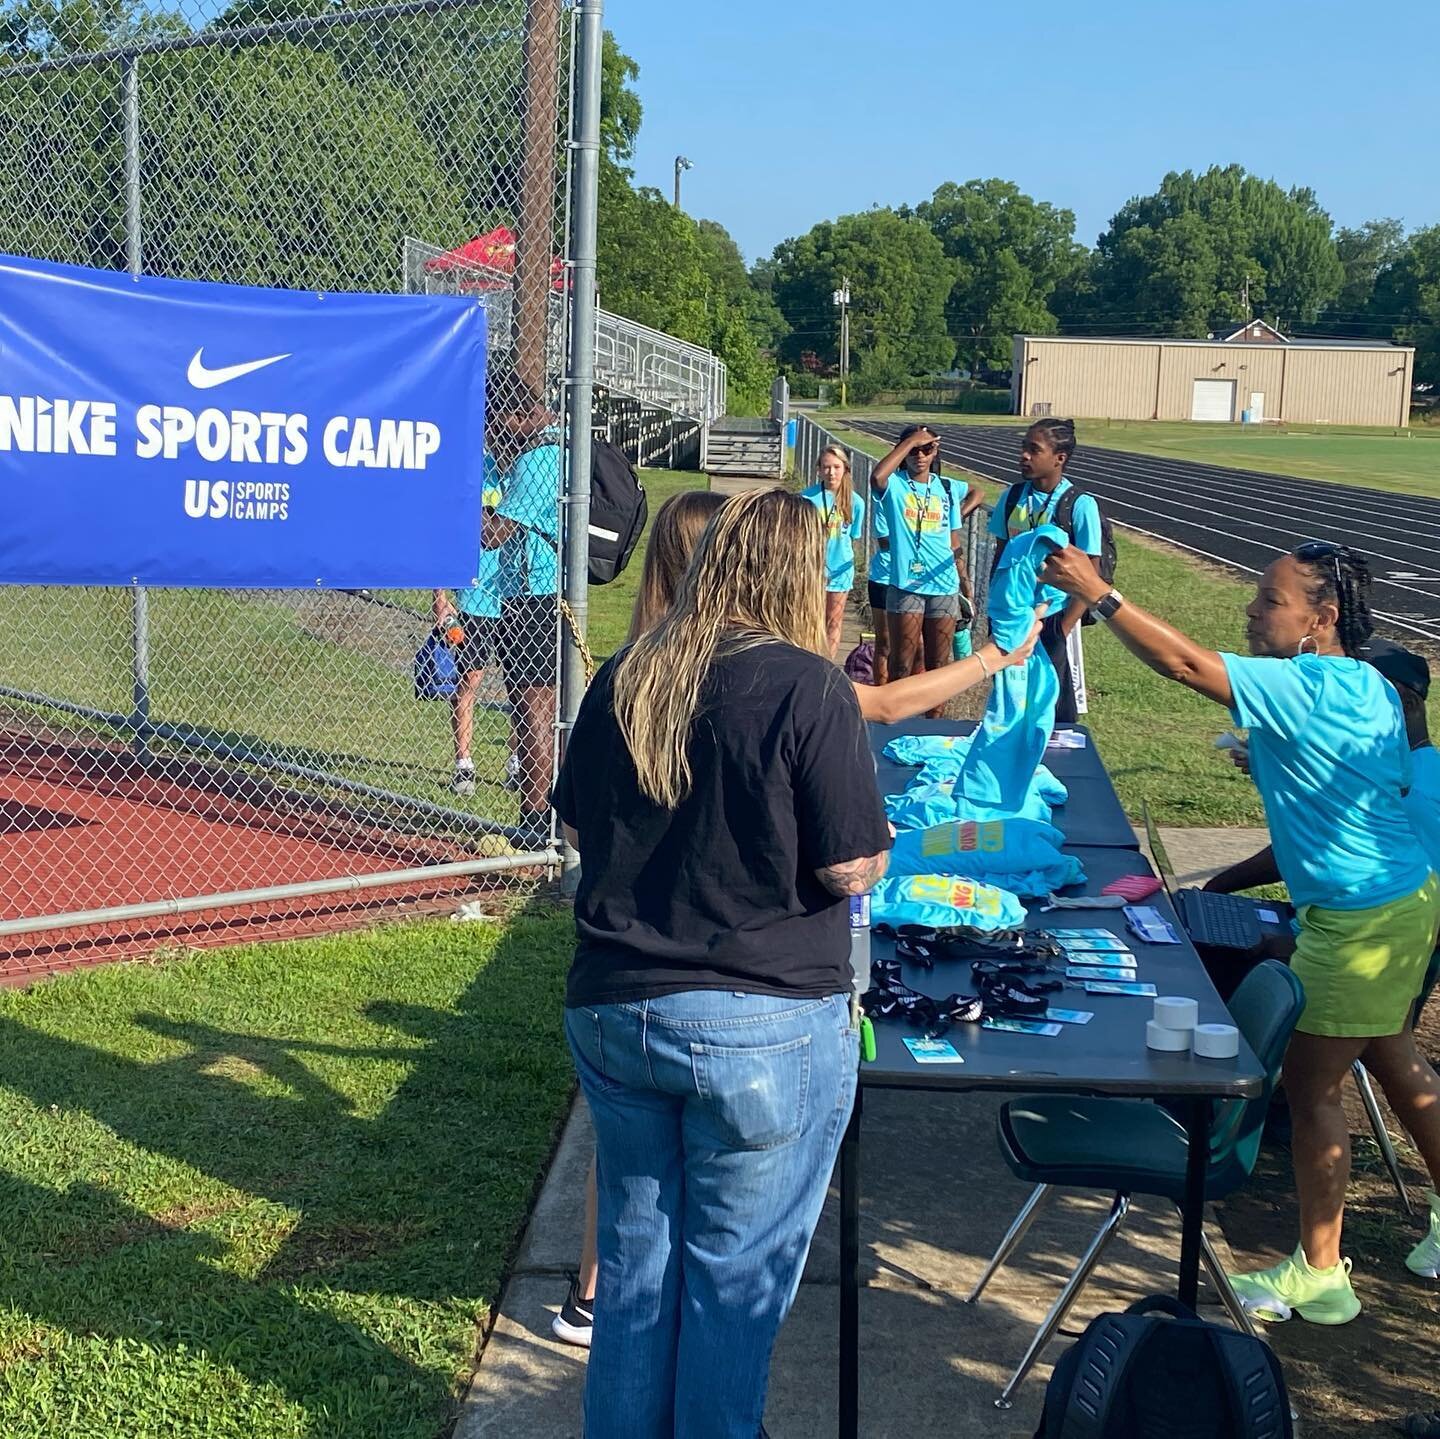 Another successful track camp in Salisbury this weekend complete with educational instruction and  hydration from @biosteelsports @rowansalisburyschools with @_thebodyshopp and @ussportscamps @nikesportscamp JET&hellip; come fly with us!